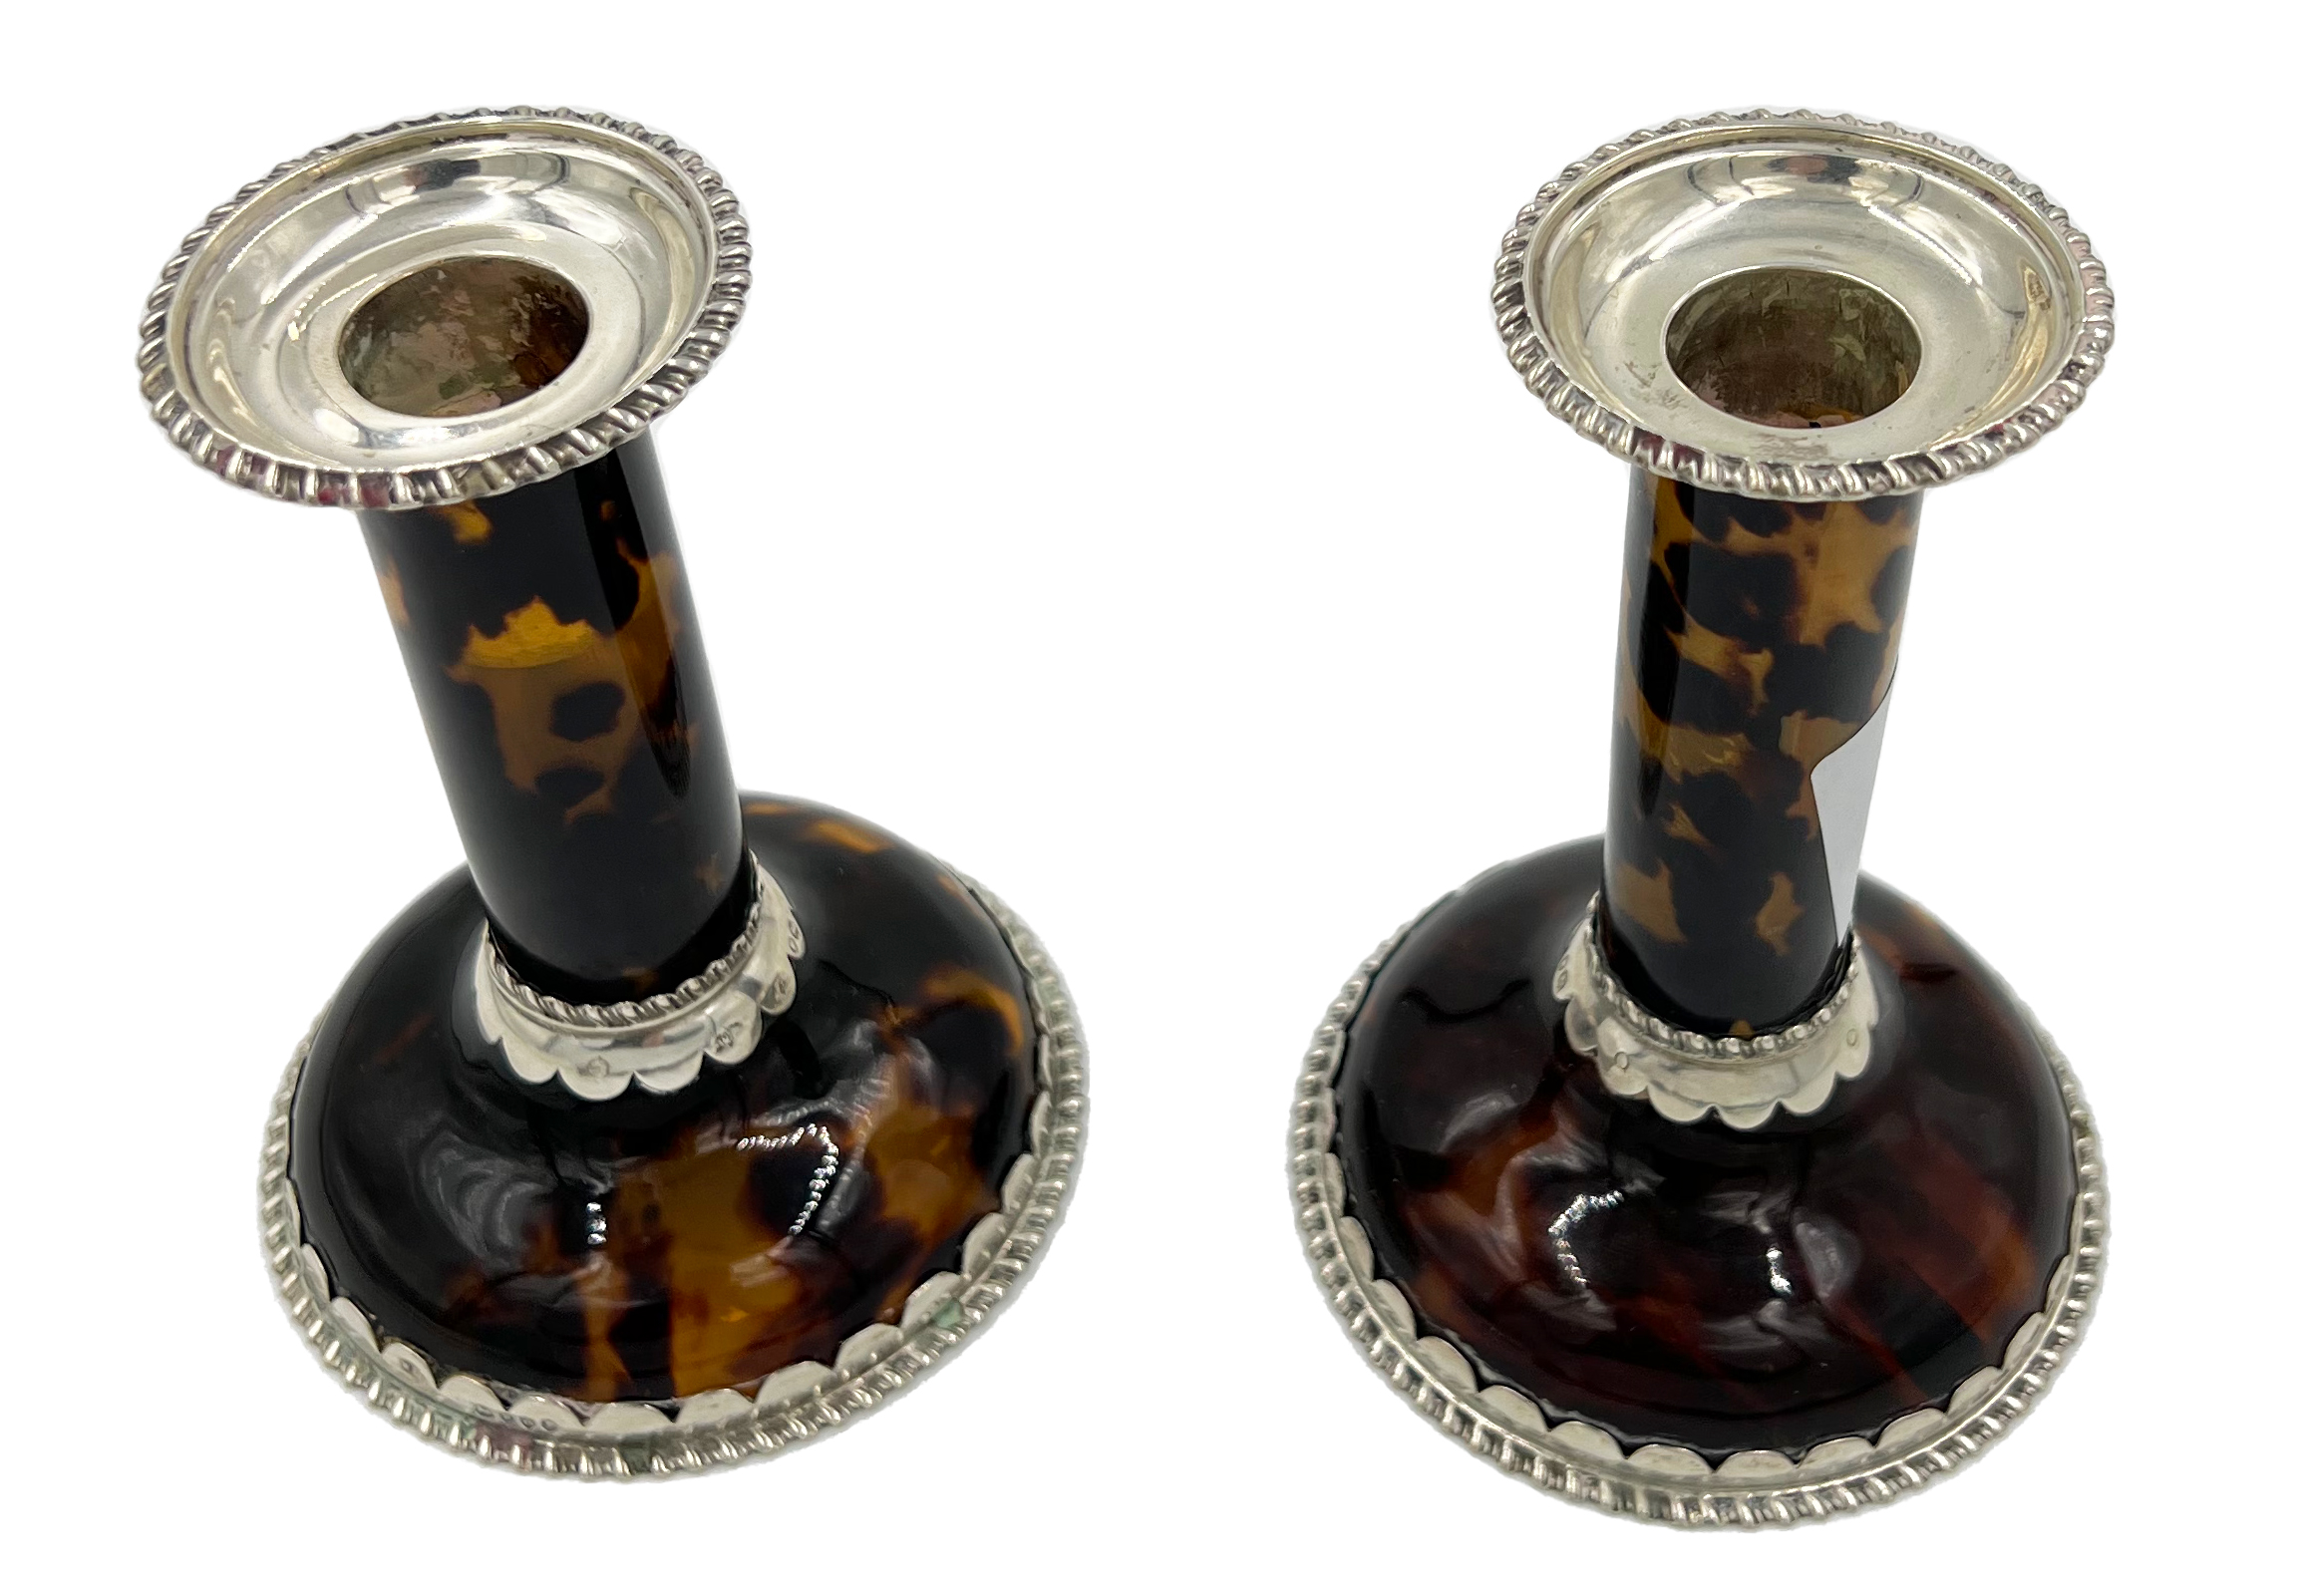 A FINE PAIR OF SILVER MOUNTED TORTOISESHELL CANDLESTICKS, LONDON, WILLIAM COMYNS, 1889 - Image 2 of 6